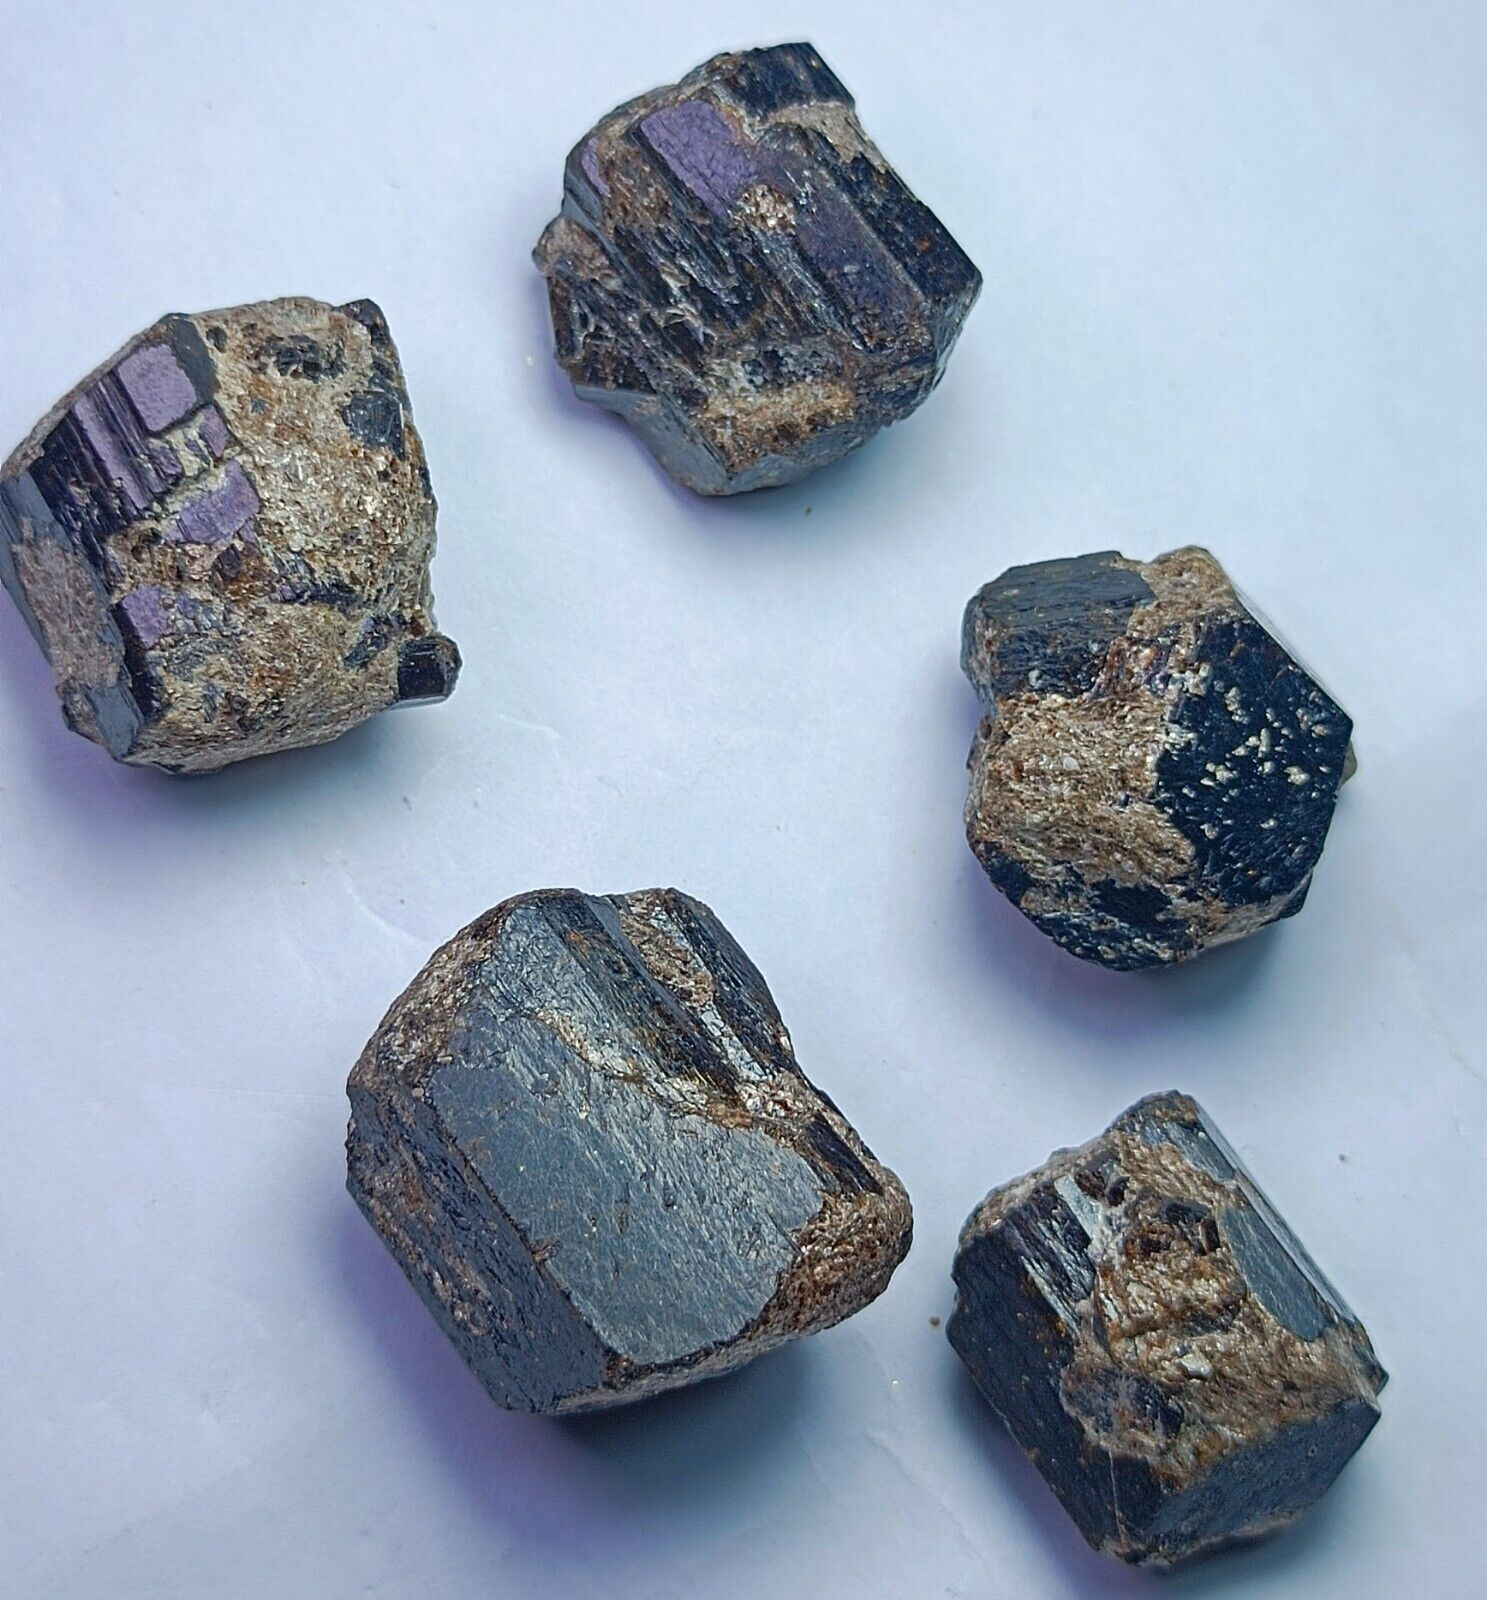 5 Pcs Rare Dravite tourmaline Crystals W Mascovite mica from Afghanistan(122 gm)